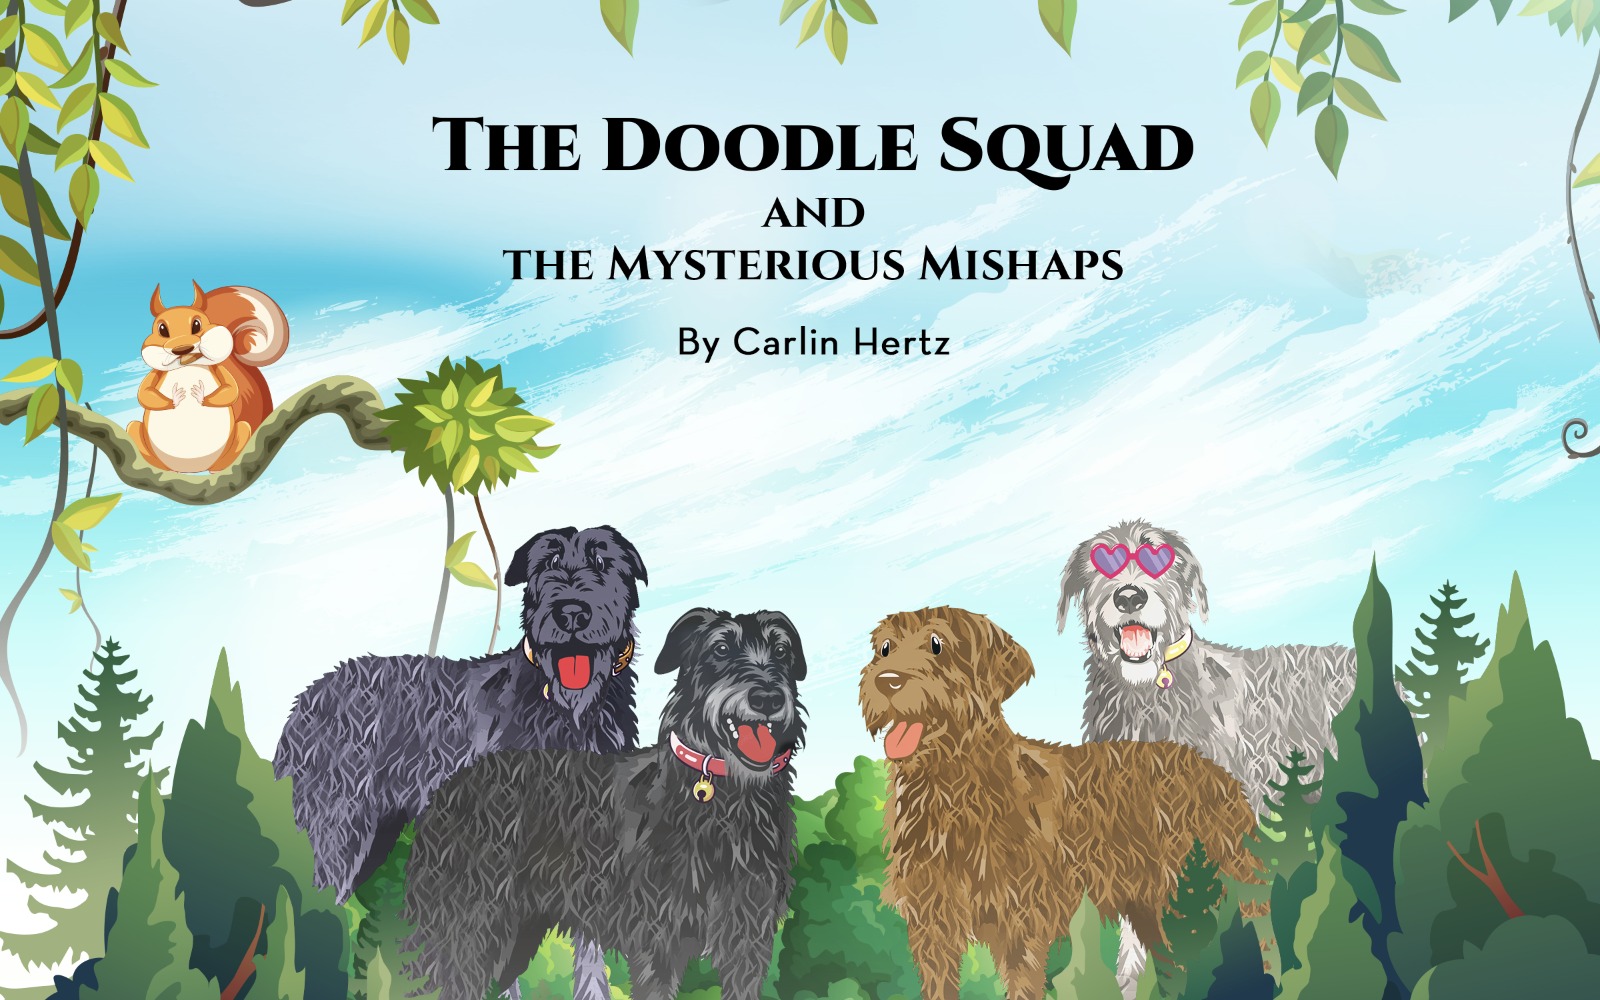 Author Carlin Hertz’s dog gets his first children’s book